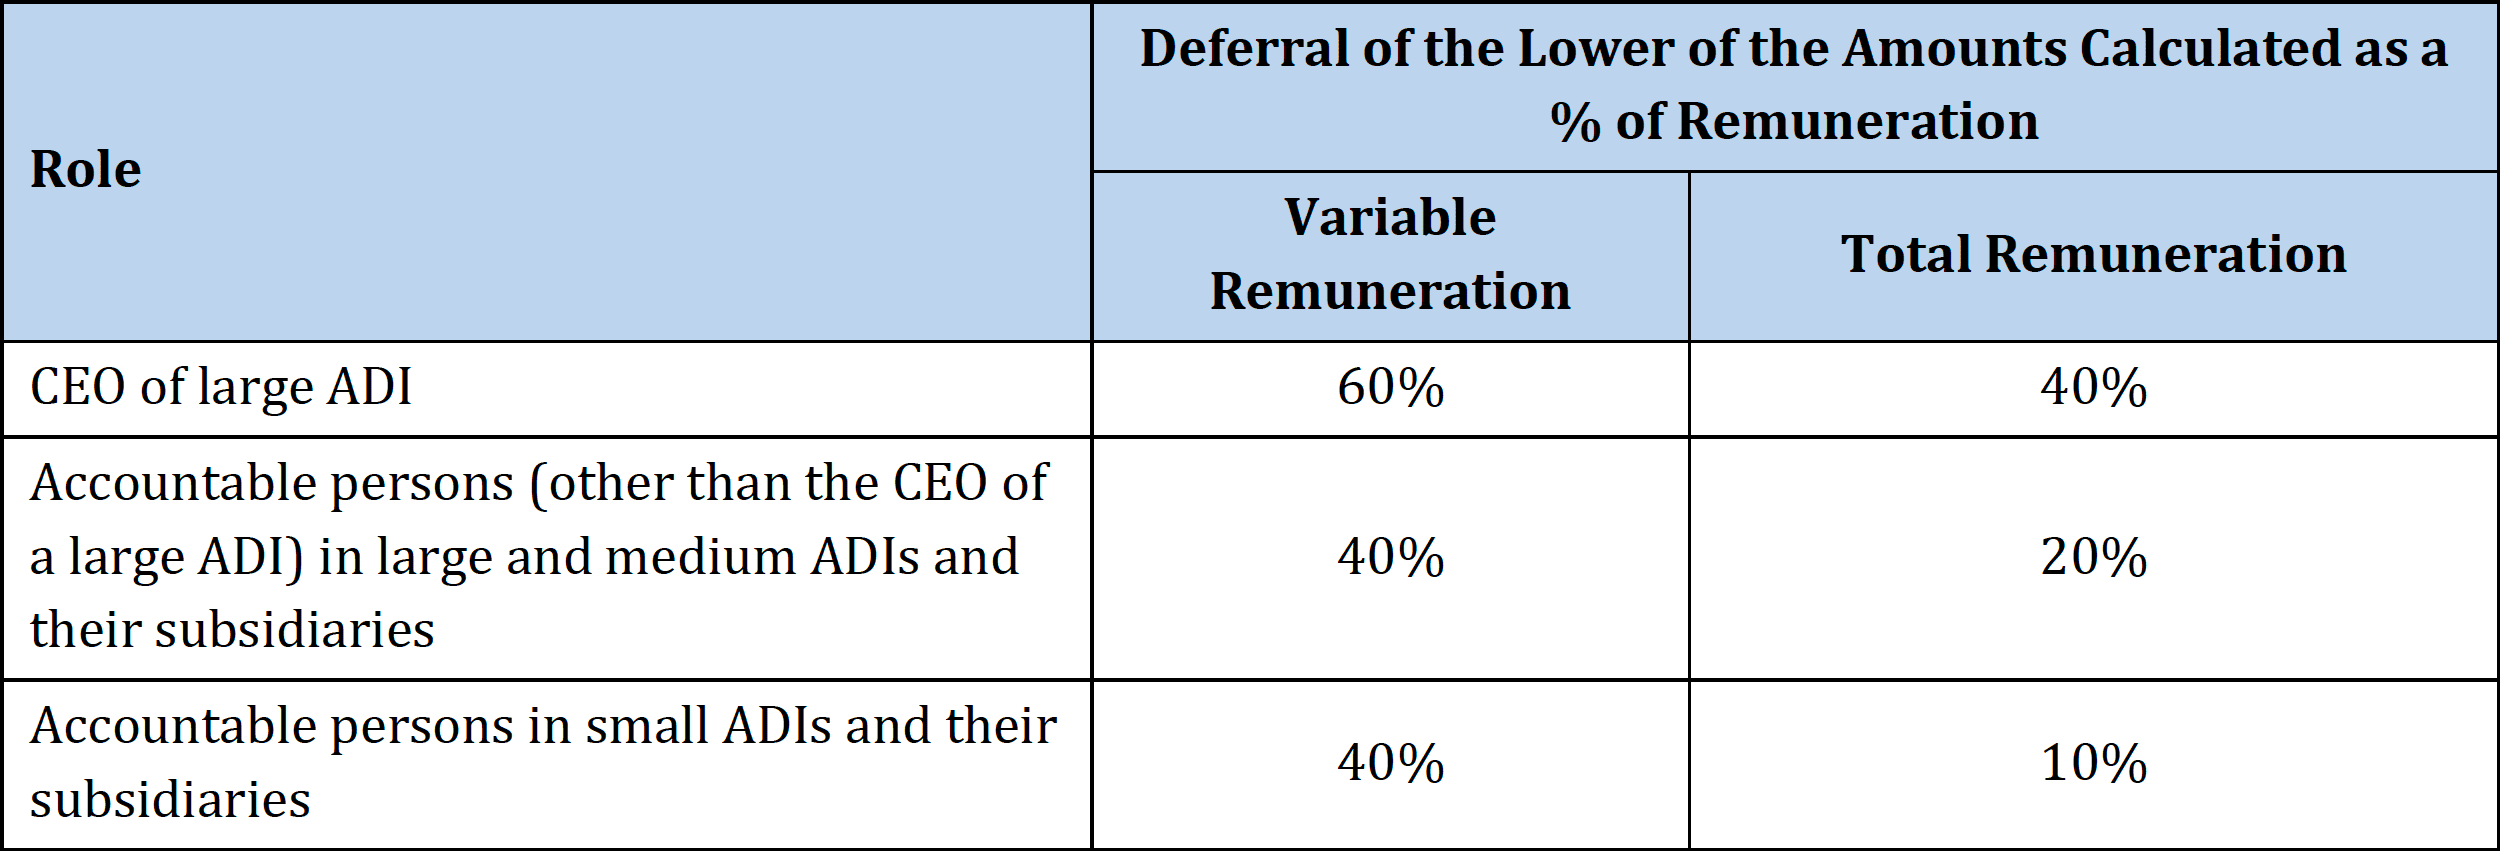 Deferral of the lower of the amounts calculated as a % of remuneration